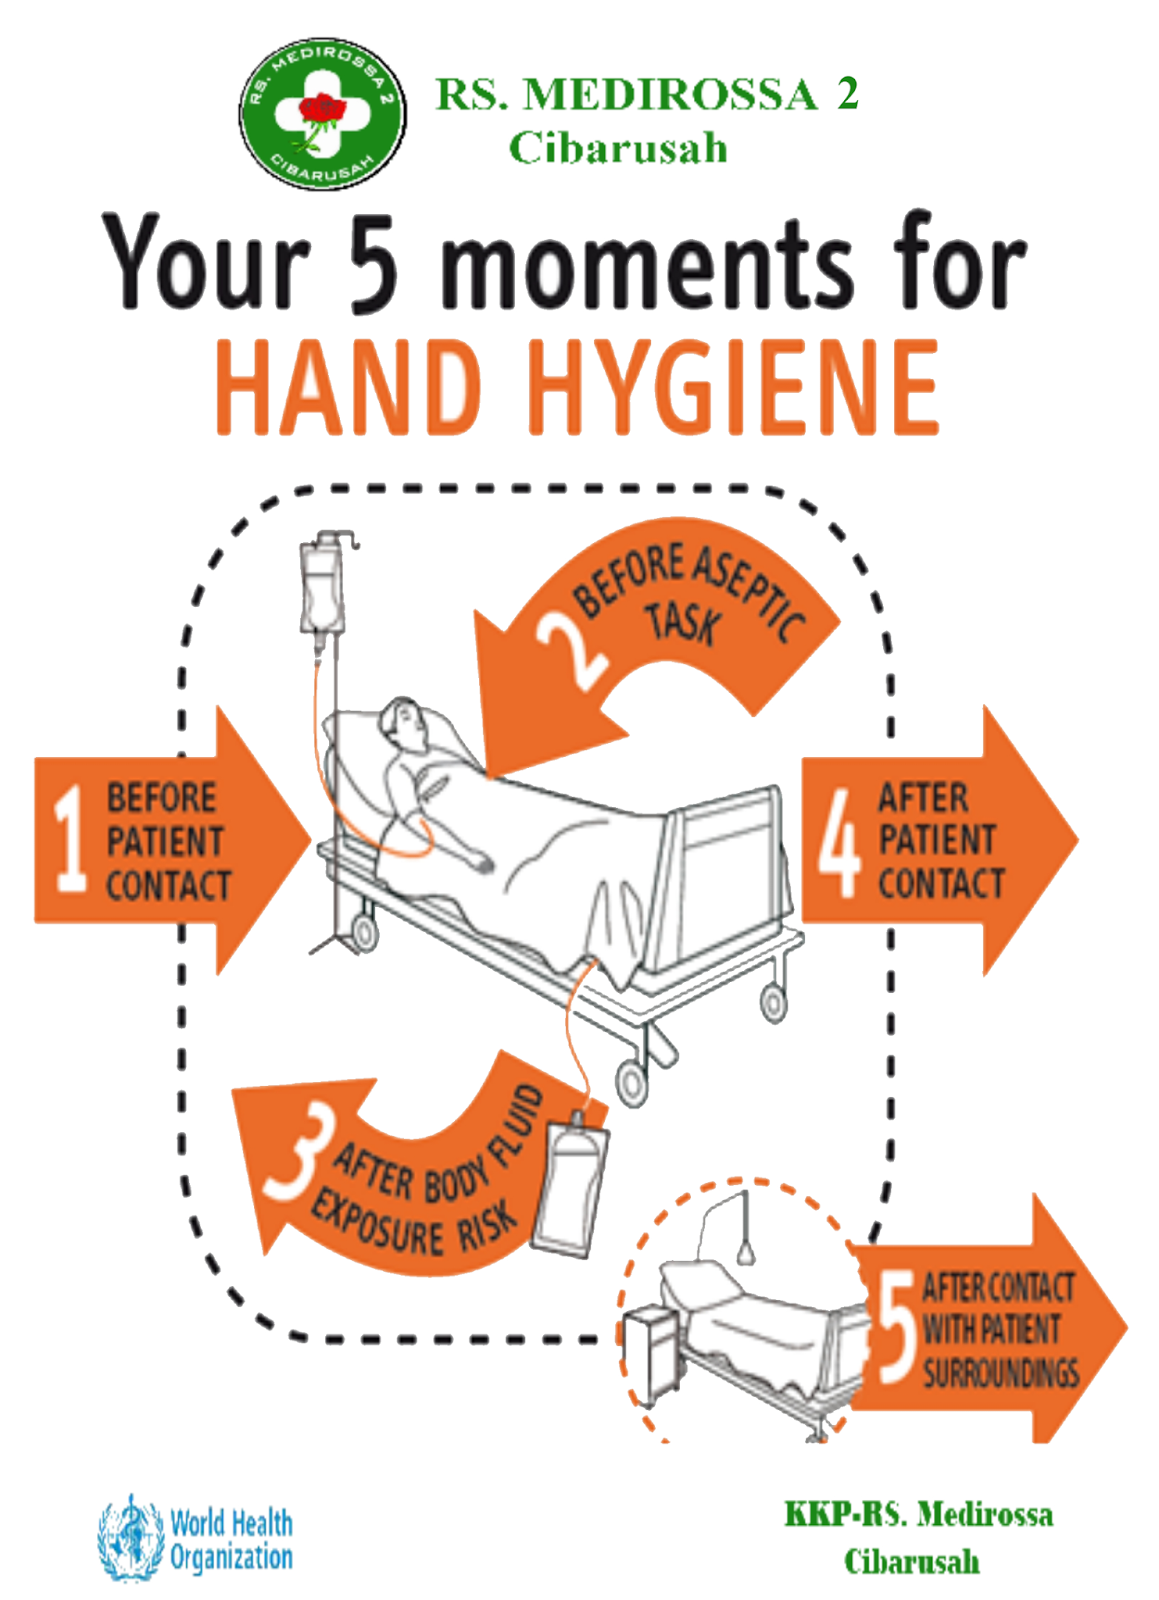 HEALTH SCIENCE: 5 moments for hand hygiene